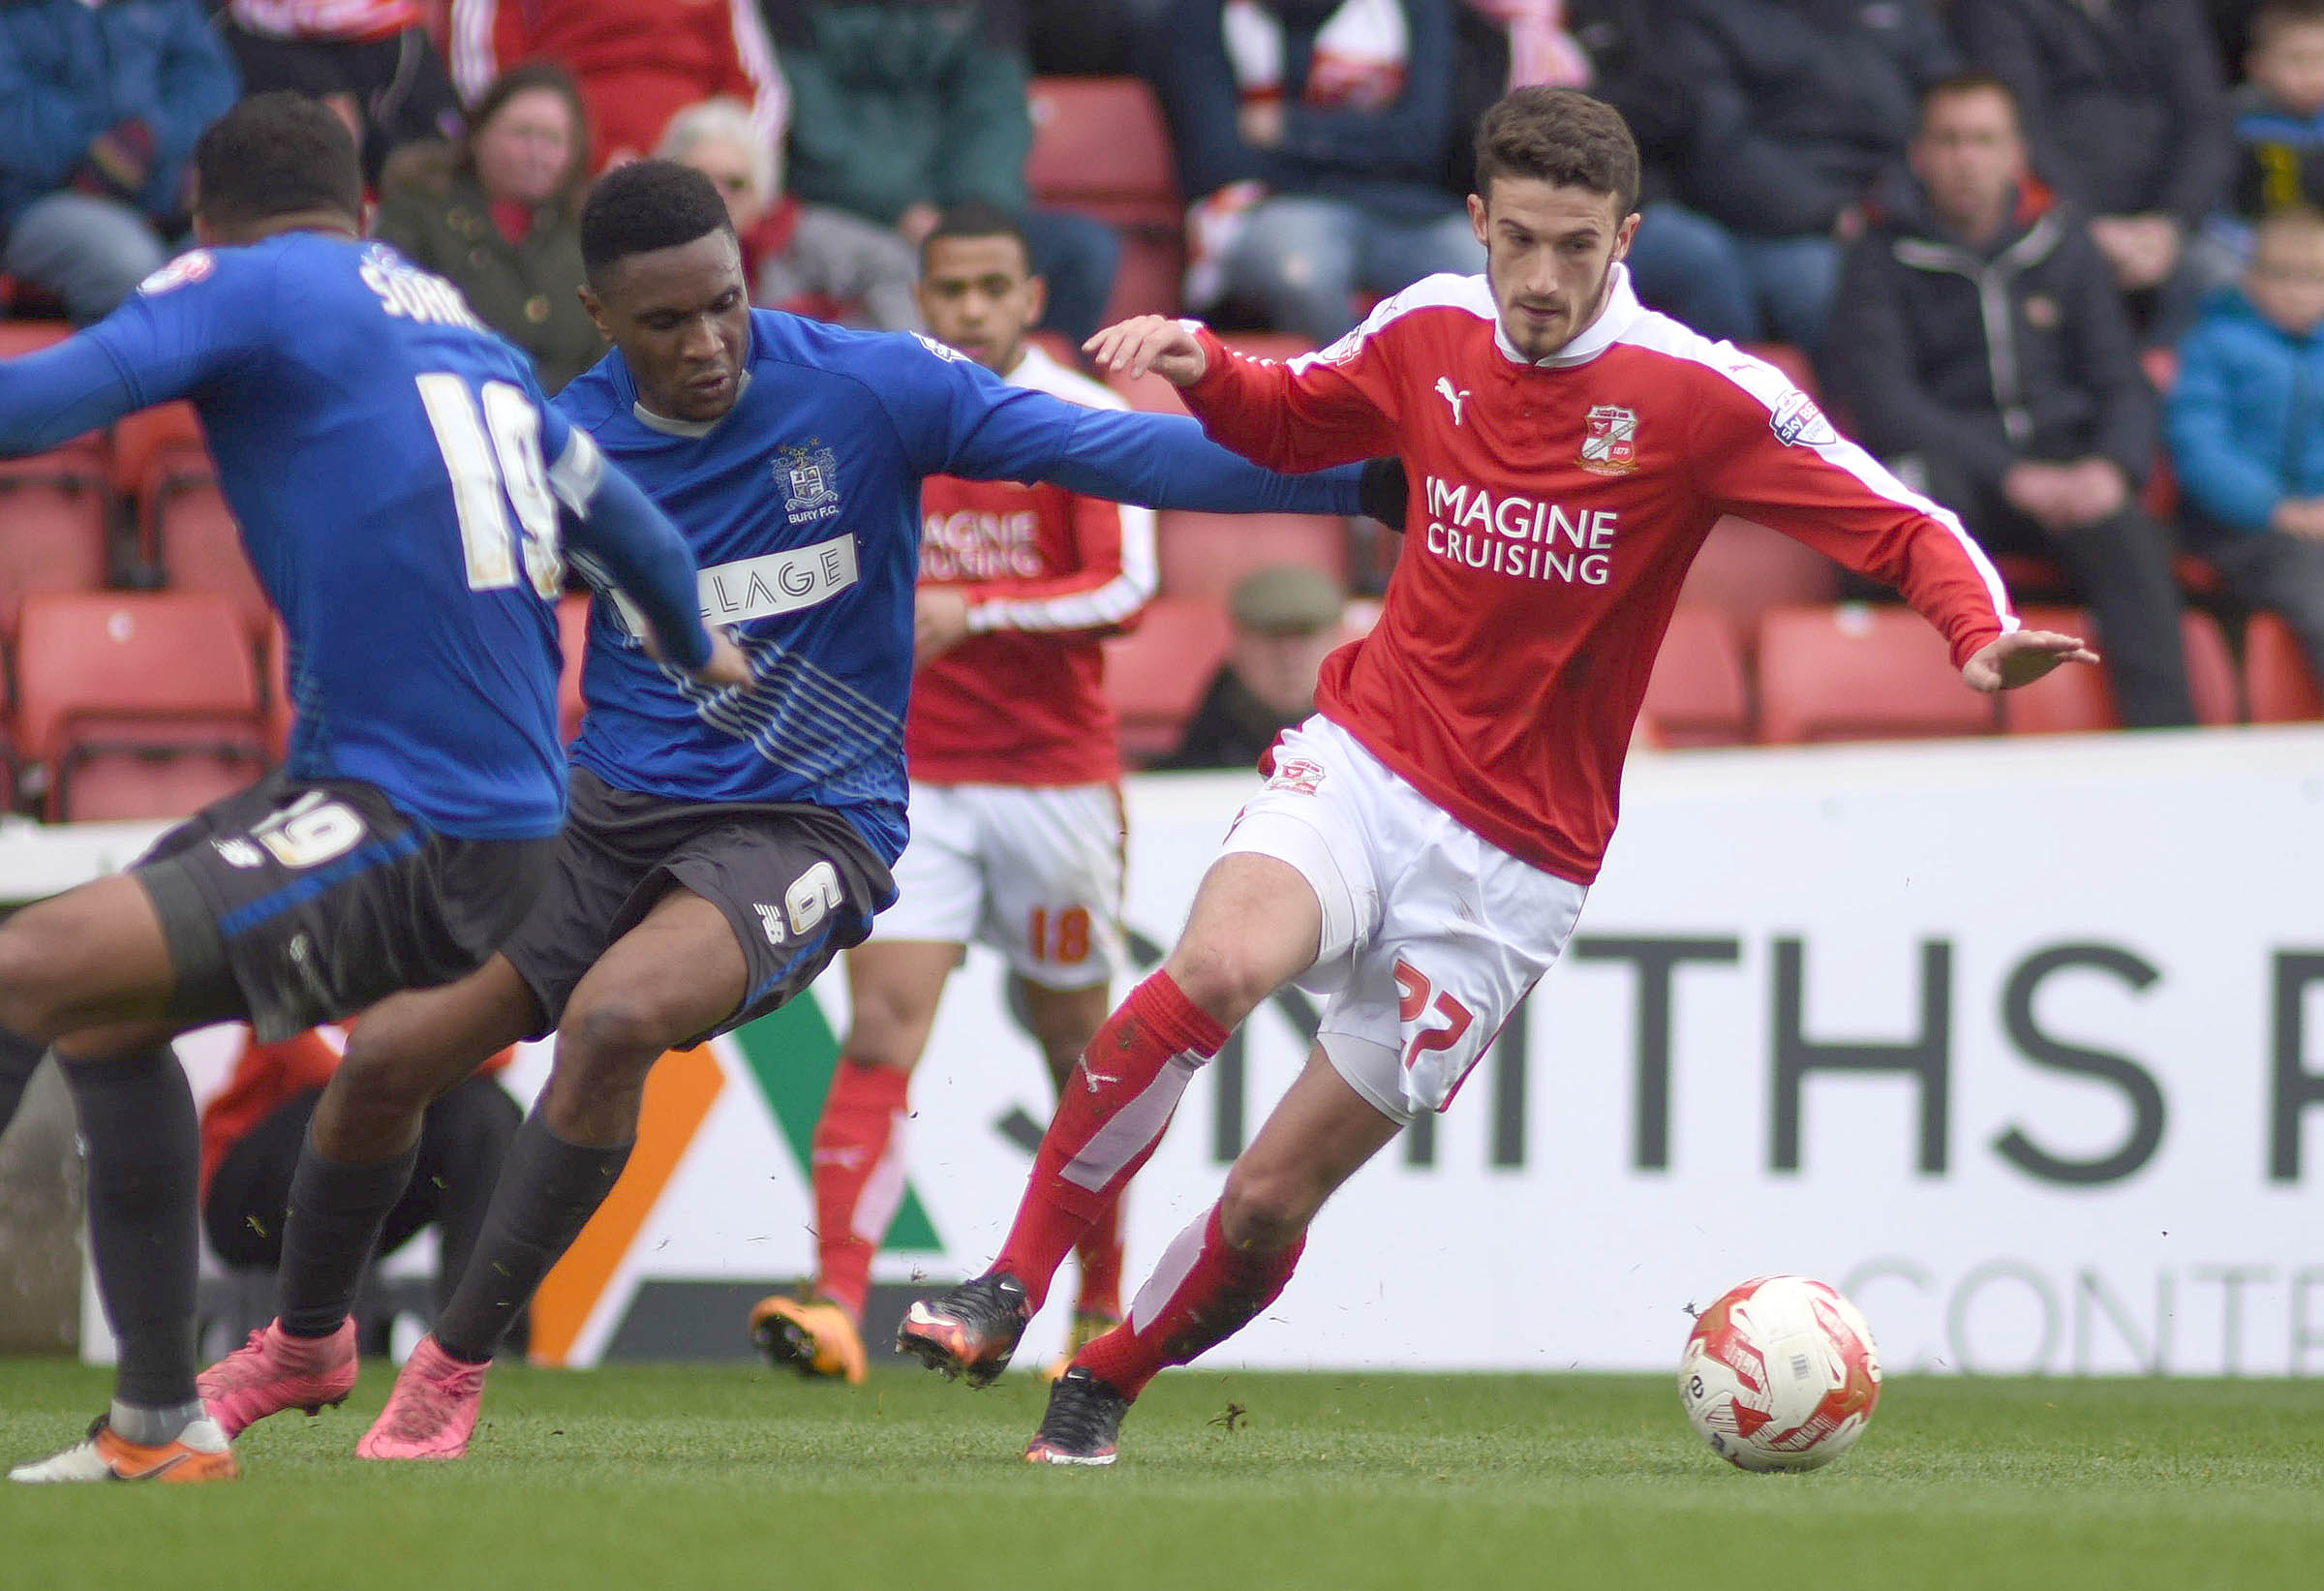 Bradley Barry scoops STFC player's player of the season